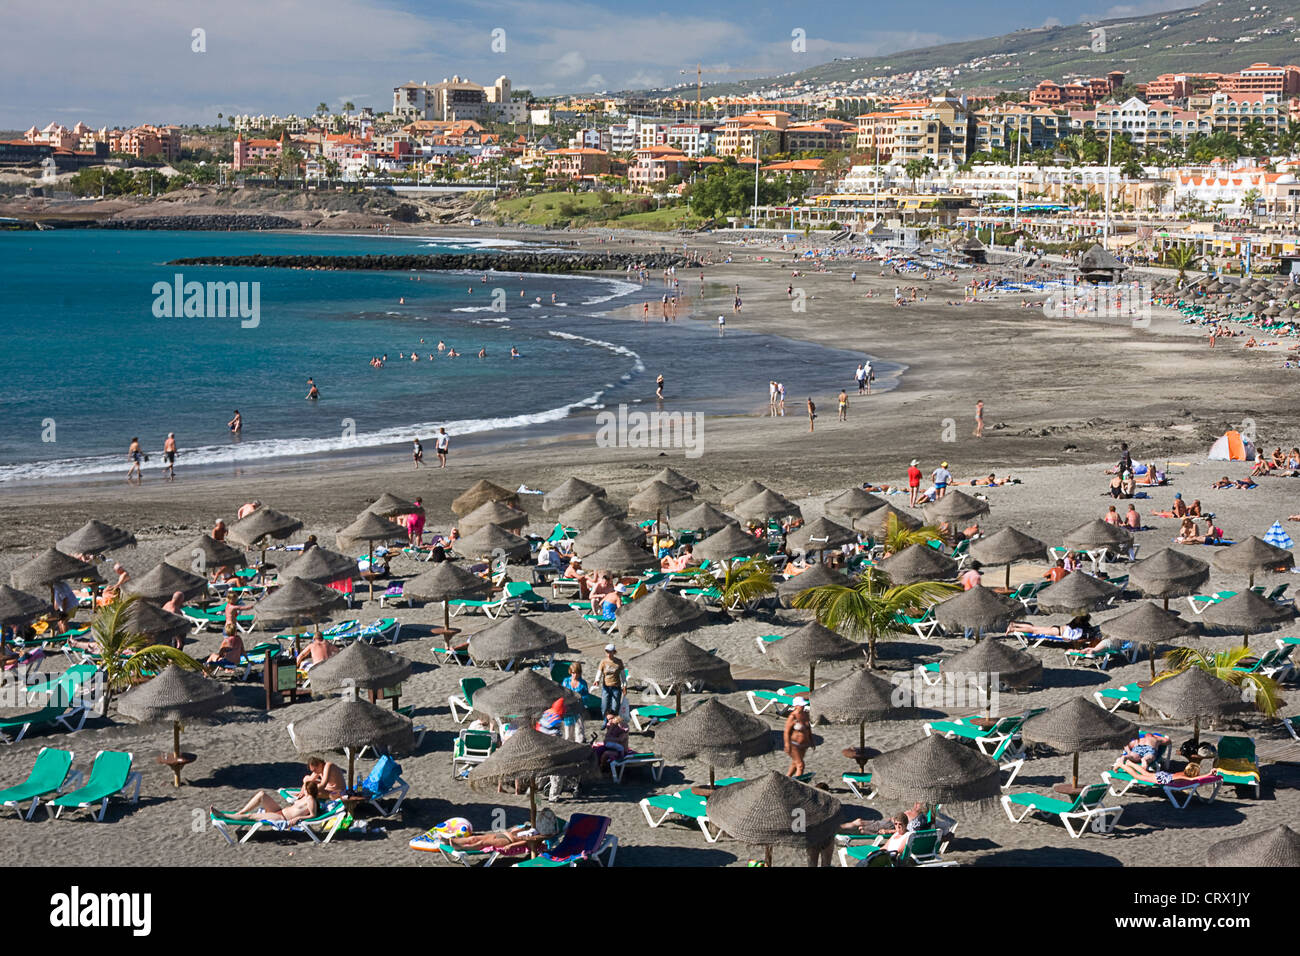 Playa De Fanabe High Resolution Stock Photography and Images - Alamy